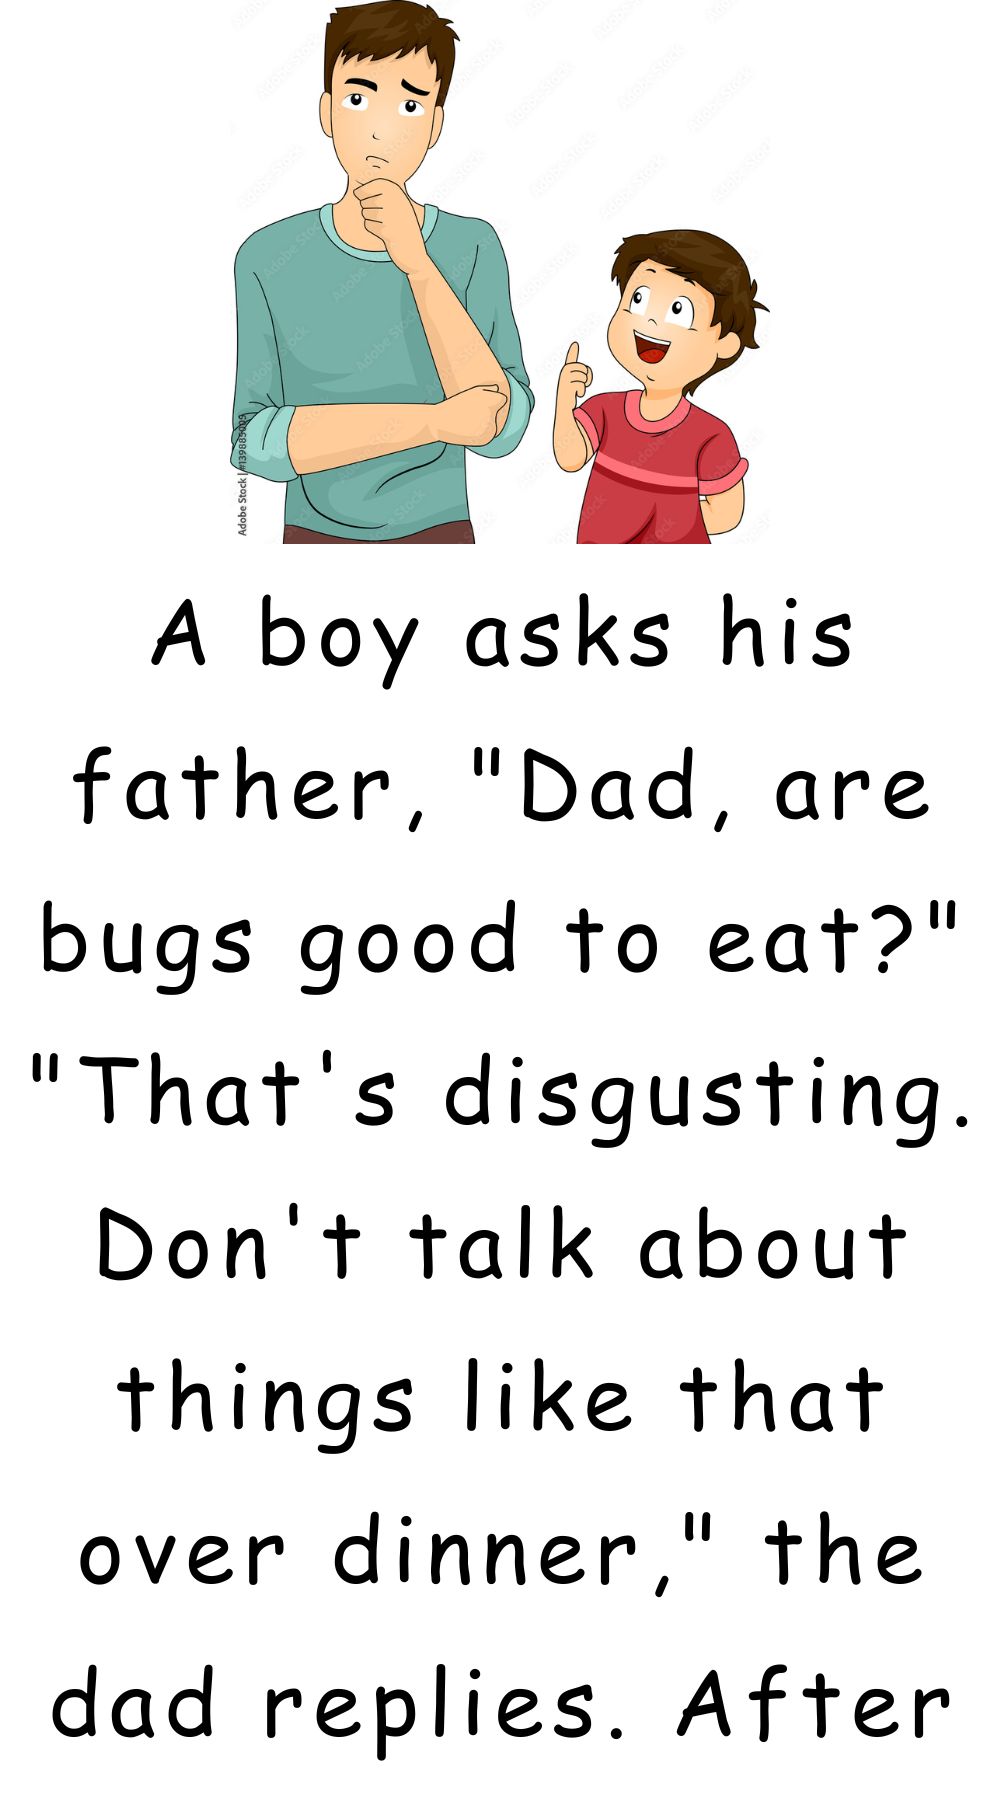 A boy asks his father